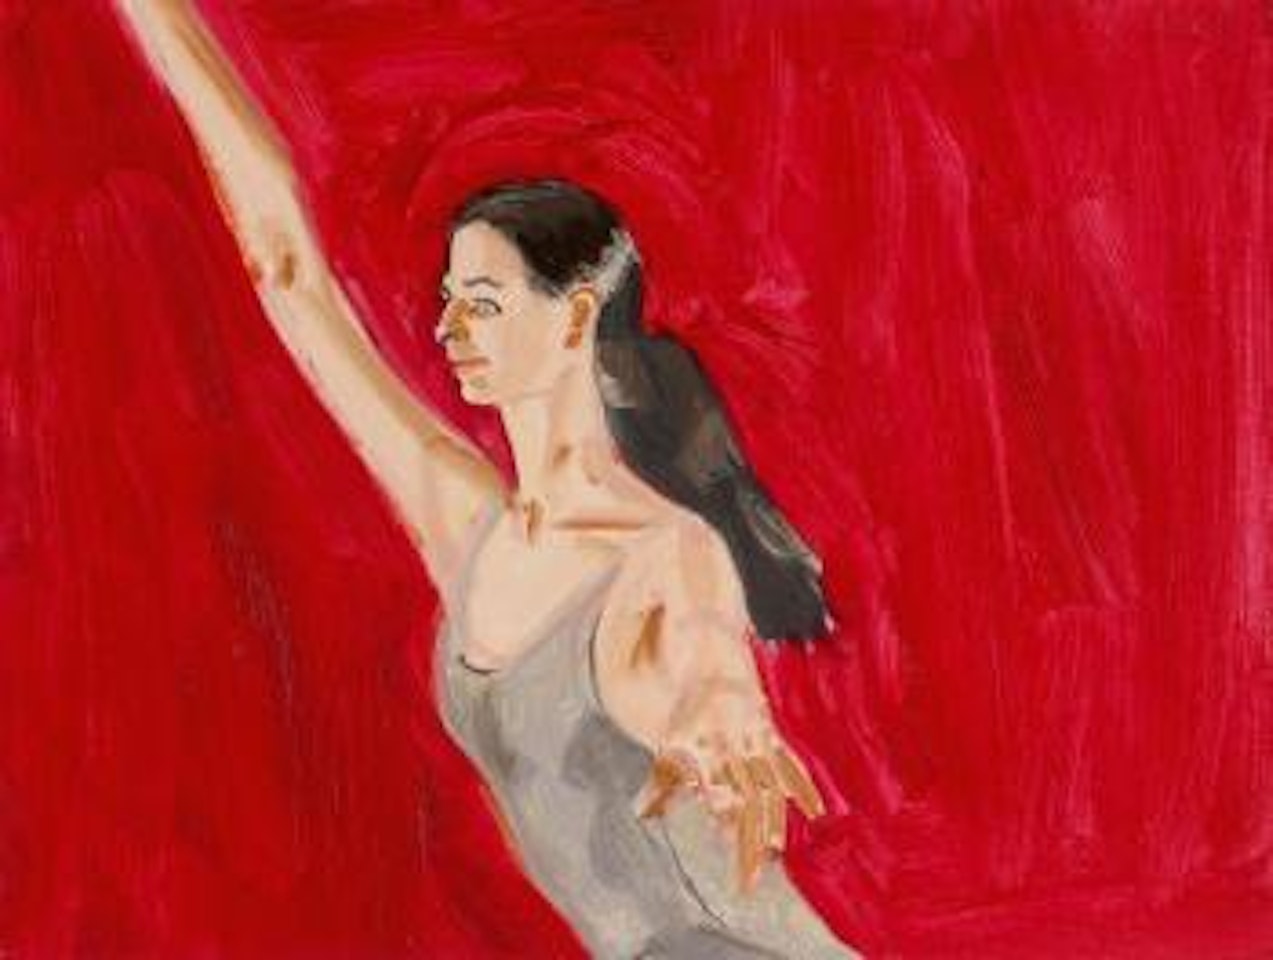 Pat With Arms Extended by Alex Katz